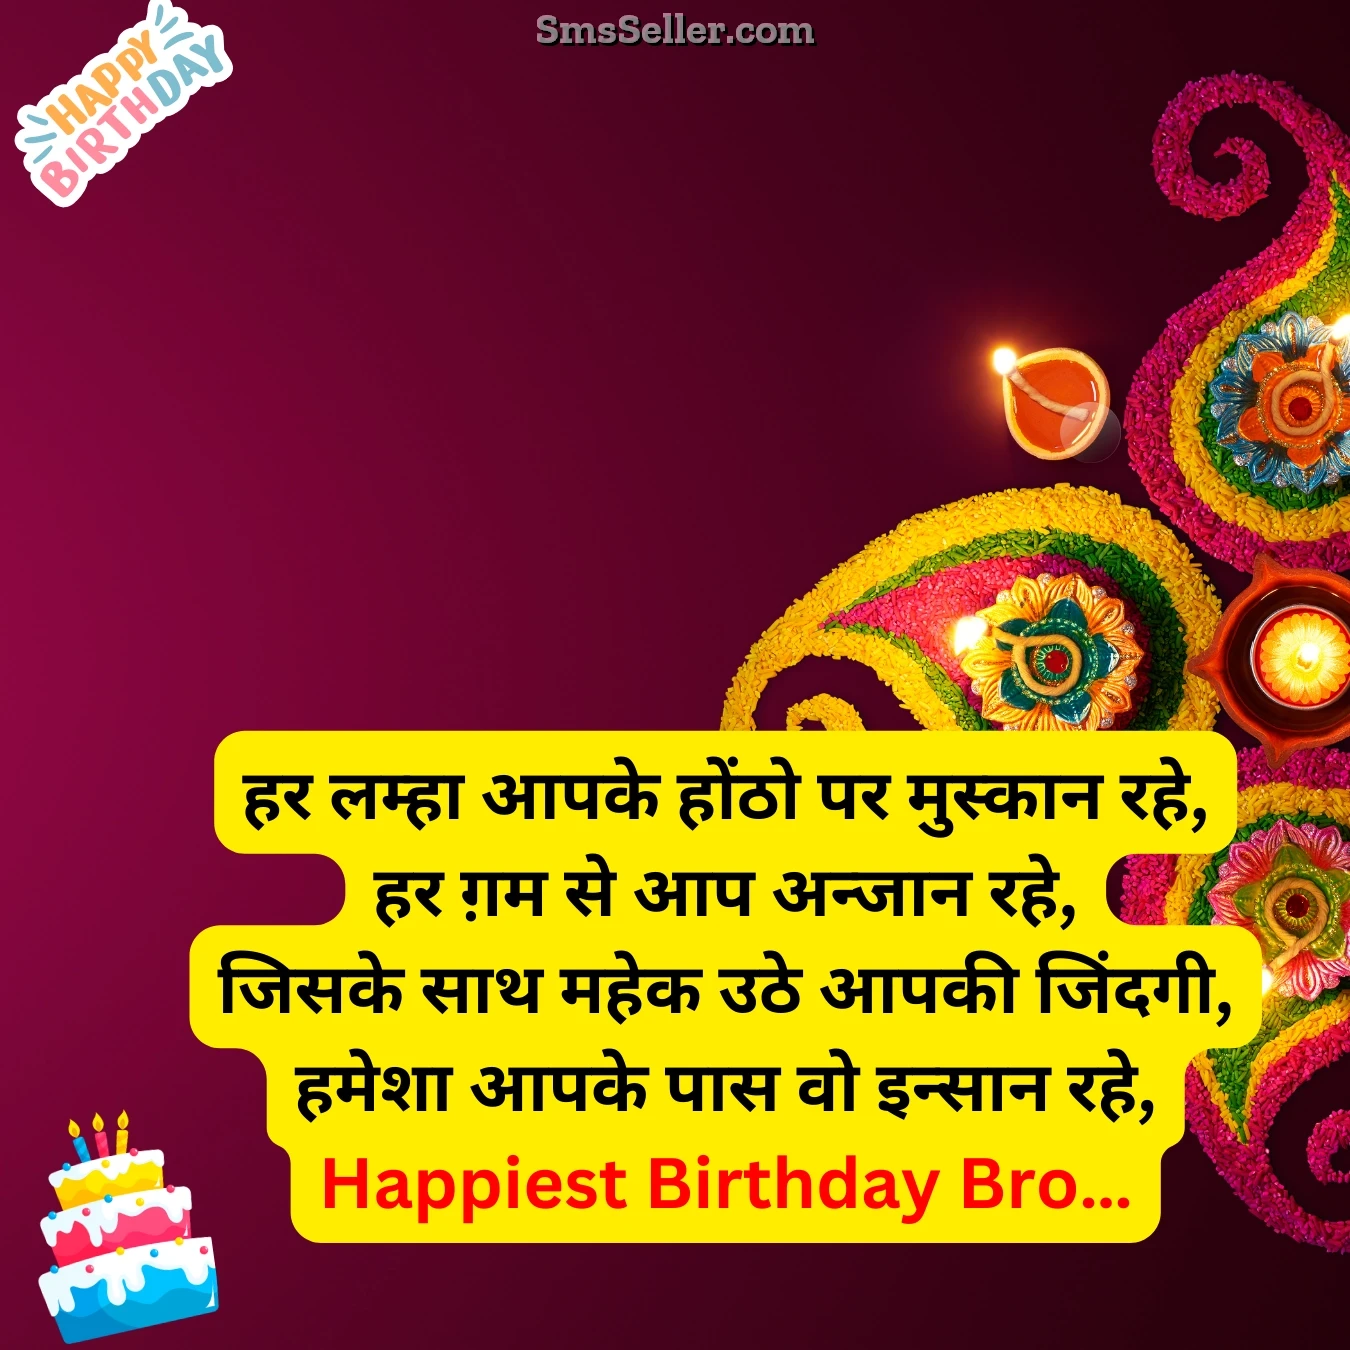 brother birthday wishes sister hontho par har lamha